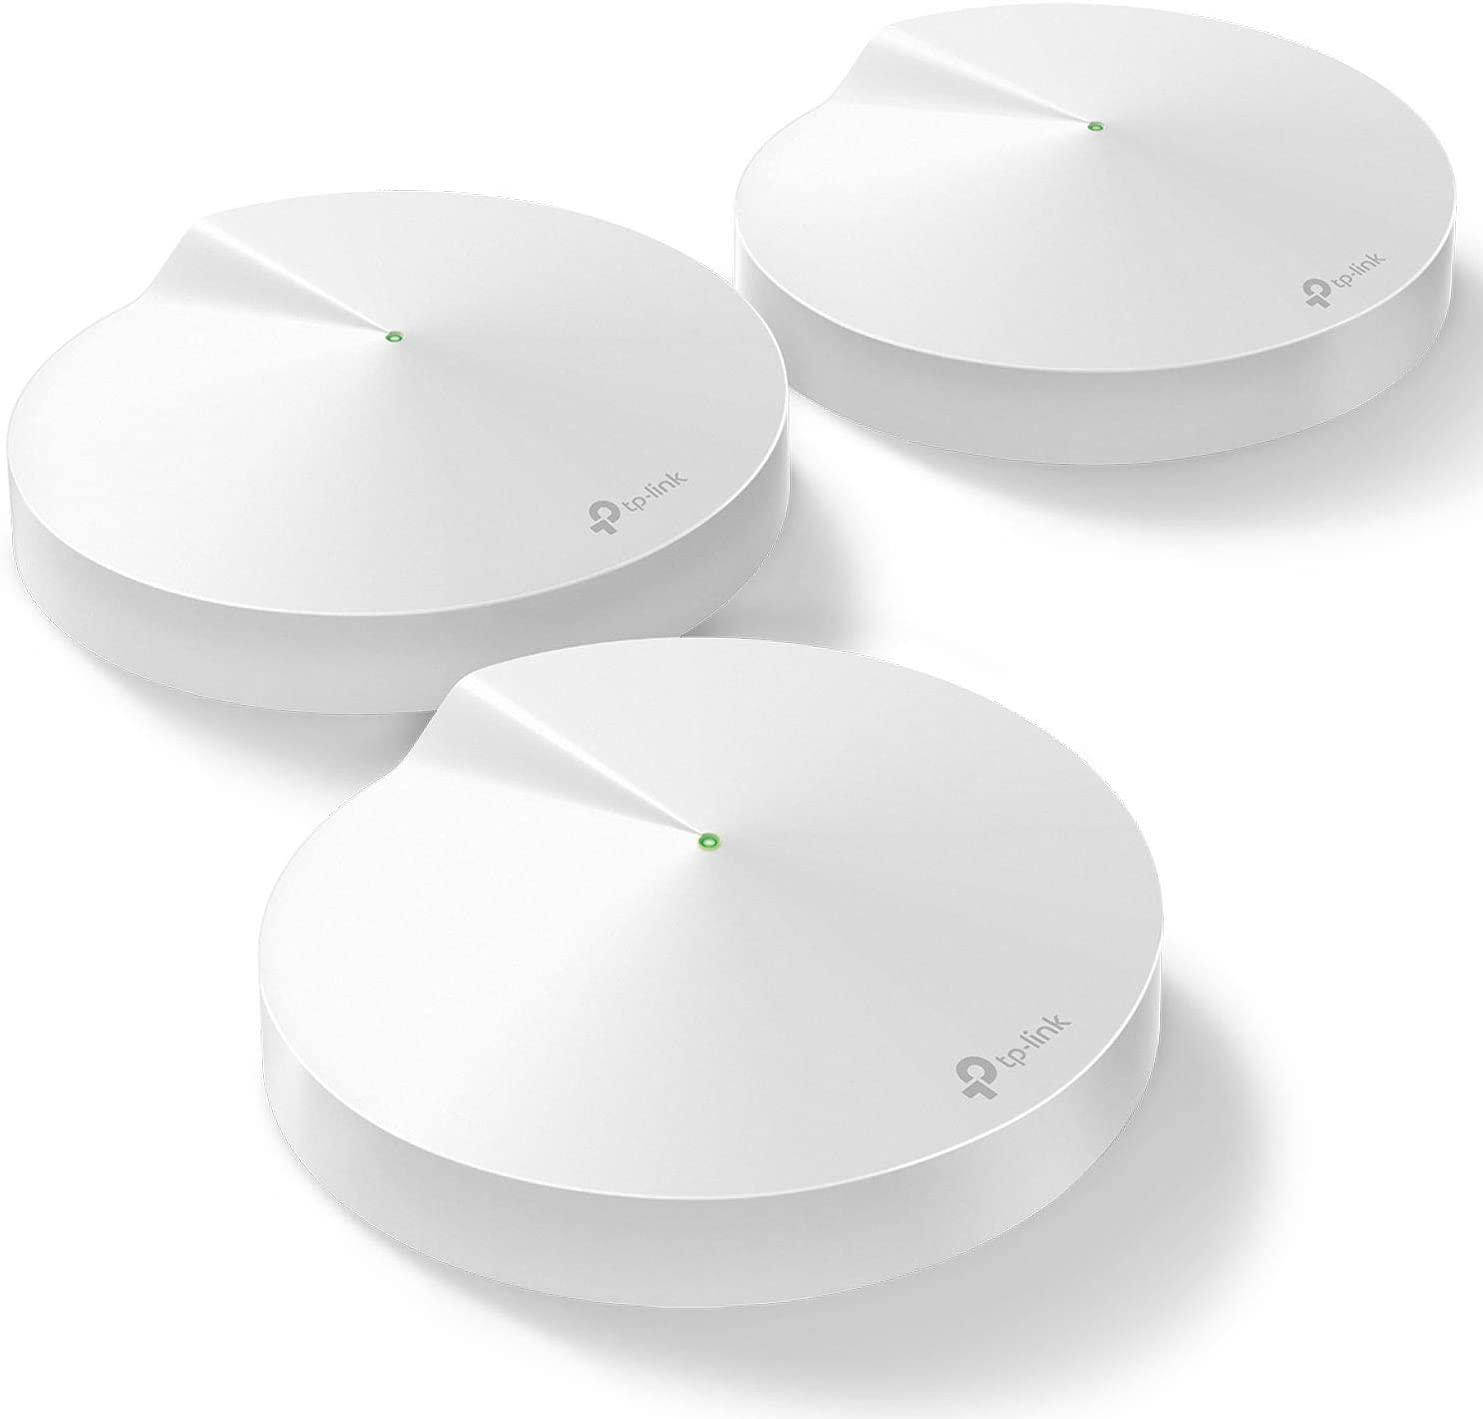 3 TP-Link Deco M5 AC1300 Whole Home Wifi System for $149.99 Shipped